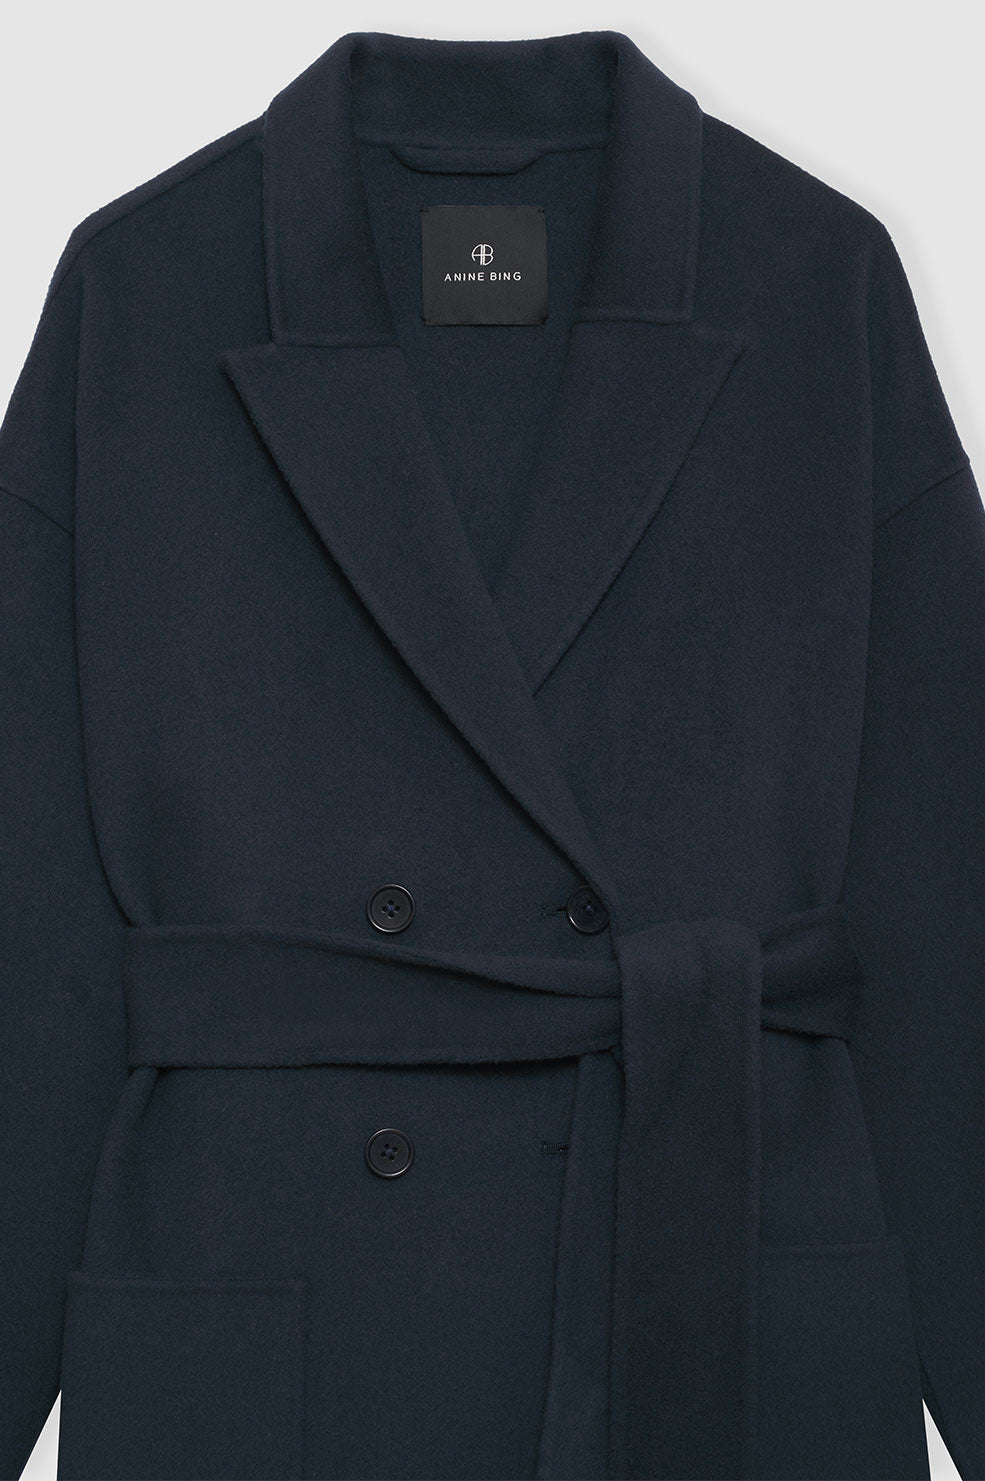 ANINE BING Dylan Maxi Coat - Navy Cashmere Blend - Front View Close